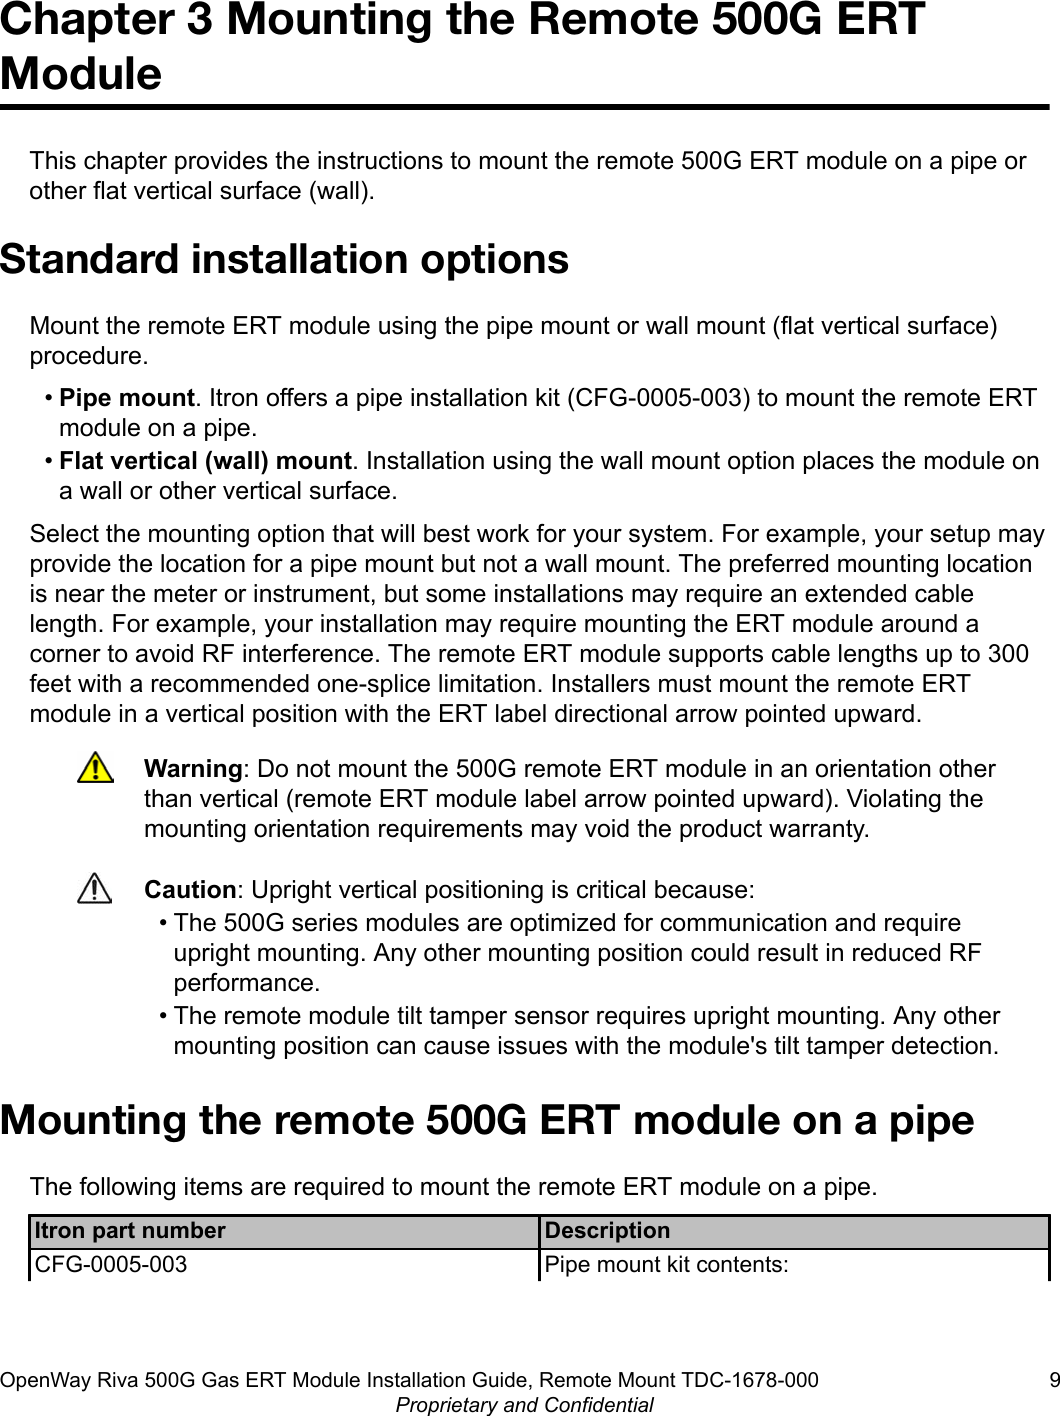 Chapter 3 Mounting the Remote 500G ERTModuleThis chapter provides the instructions to mount the remote 500G ERT module on a pipe orother flat vertical surface (wall).Standard installation optionsMount the remote ERT module using the pipe mount or wall mount (flat vertical surface)procedure.•Pipe mount. Itron offers a pipe installation kit (CFG-0005-003) to mount the remote ERTmodule on a pipe.•Flat vertical (wall) mount. Installation using the wall mount option places the module ona wall or other vertical surface.Select the mounting option that will best work for your system. For example, your setup mayprovide the location for a pipe mount but not a wall mount. The preferred mounting locationis near the meter or instrument, but some installations may require an extended cablelength. For example, your installation may require mounting the ERT module around acorner to avoid RF interference. The remote ERT module supports cable lengths up to 300feet with a recommended one-splice limitation. Installers must mount the remote ERTmodule in a vertical position with the ERT label directional arrow pointed upward.Warning: Do not mount the 500G remote ERT module in an orientation otherthan vertical (remote ERT module label arrow pointed upward). Violating themounting orientation requirements may void the product warranty.Caution: Upright vertical positioning is critical because:• The 500G series modules are optimized for communication and requireupright mounting. Any other mounting position could result in reduced RFperformance.• The remote module tilt tamper sensor requires upright mounting. Any othermounting position can cause issues with the module&apos;s tilt tamper detection.Mounting the remote 500G ERT module on a pipeThe following items are required to mount the remote ERT module on a pipe.Itron part number DescriptionCFG-0005-003 Pipe mount kit contents:OpenWay Riva 500G Gas ERT Module Installation Guide, Remote Mount TDC-1678-000 9Proprietary and Confidential